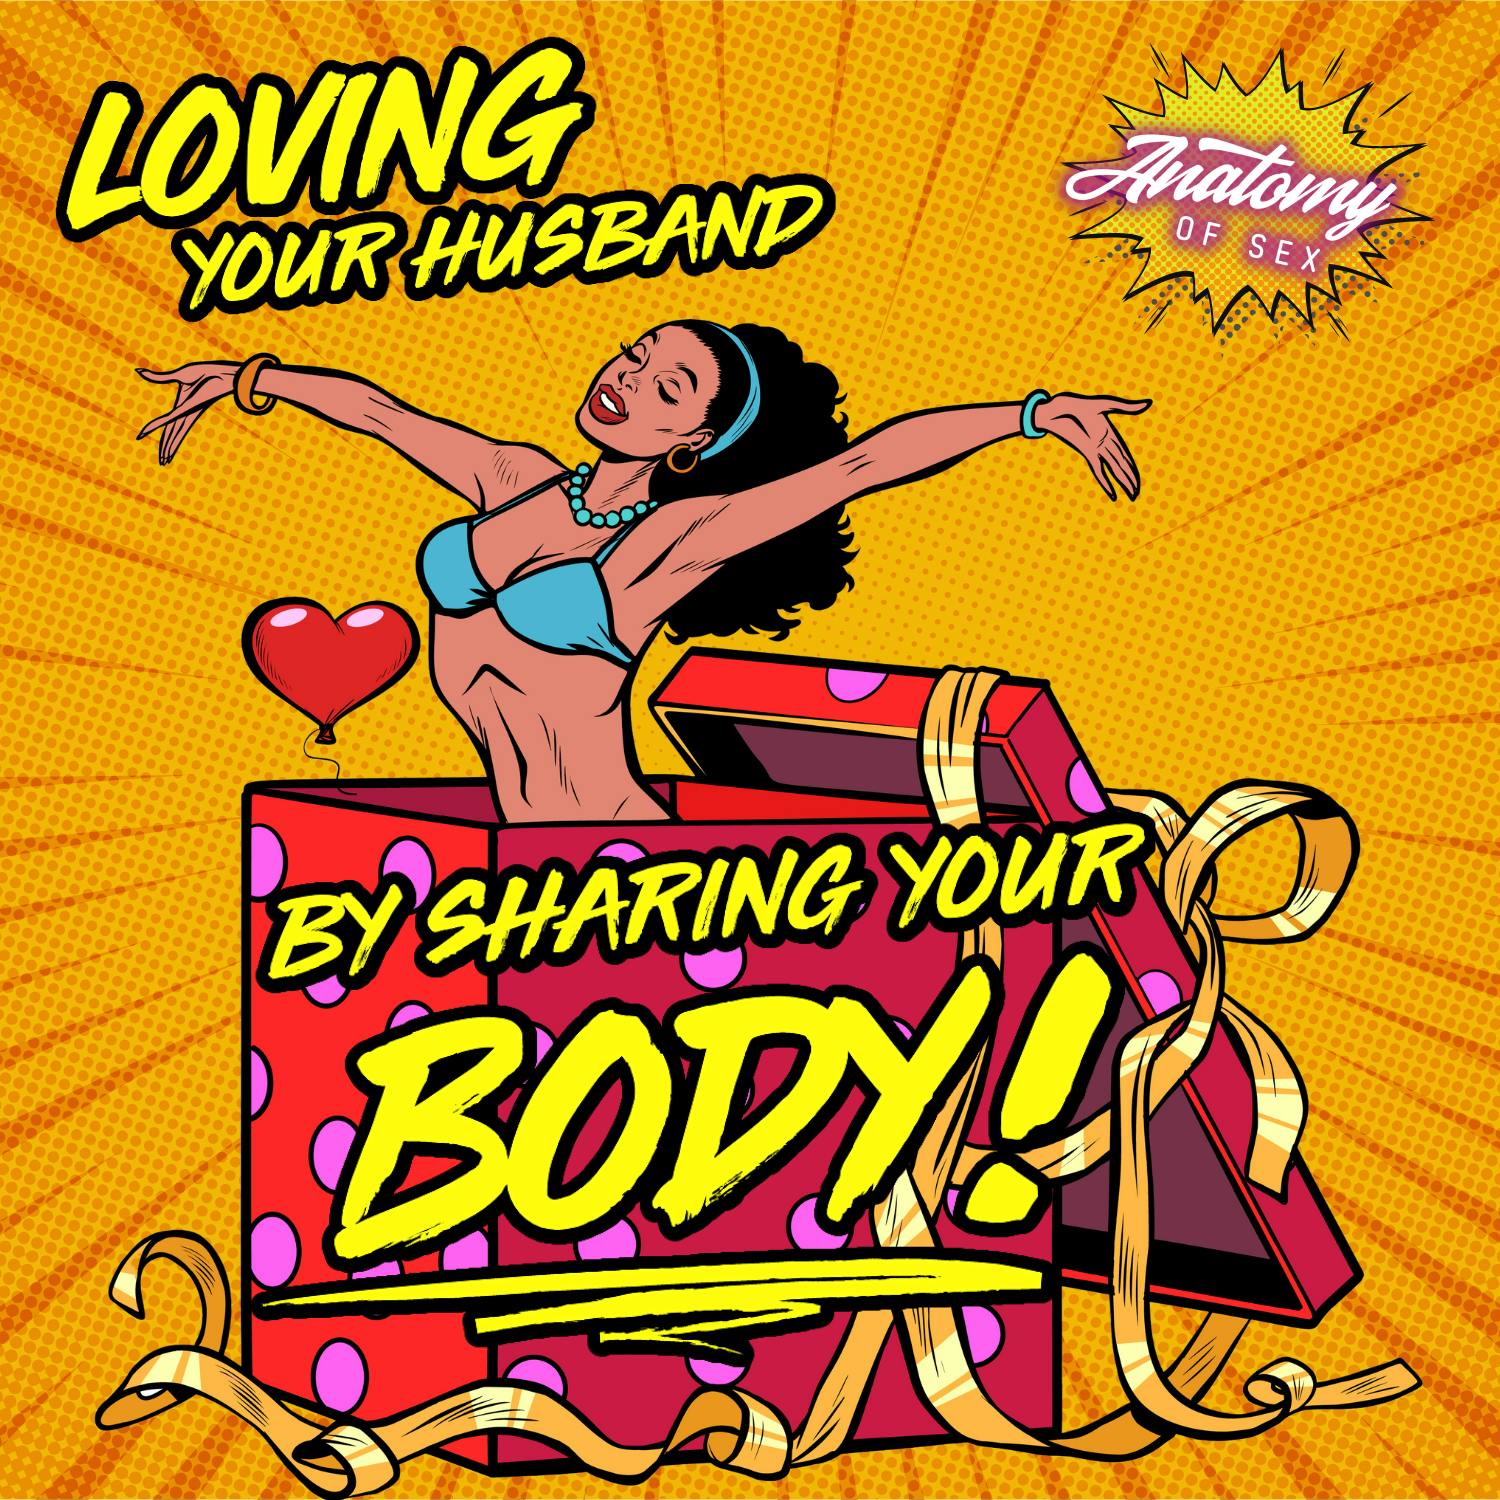 Loving Your Husband by Sharing Your Body